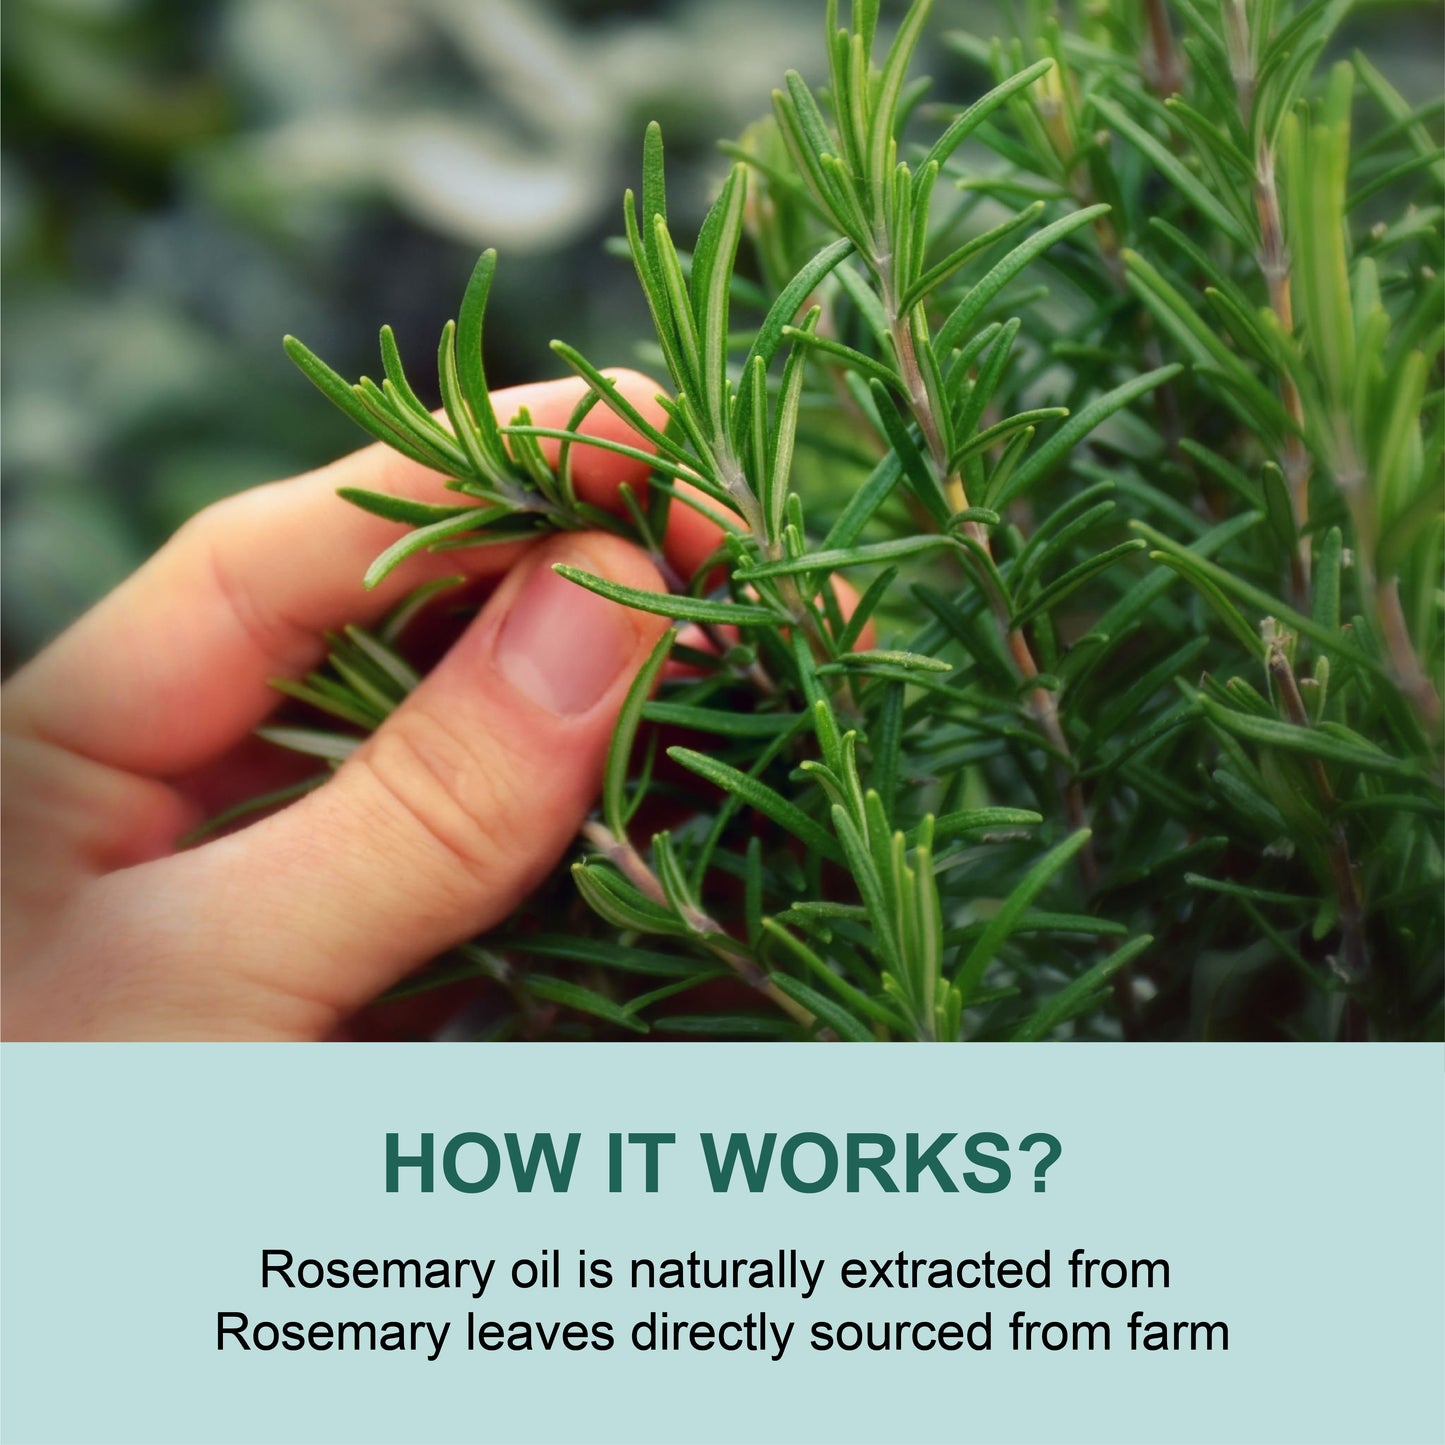 Rosemary Essential Oil for Hair Growth and Acne Control | 15 ml